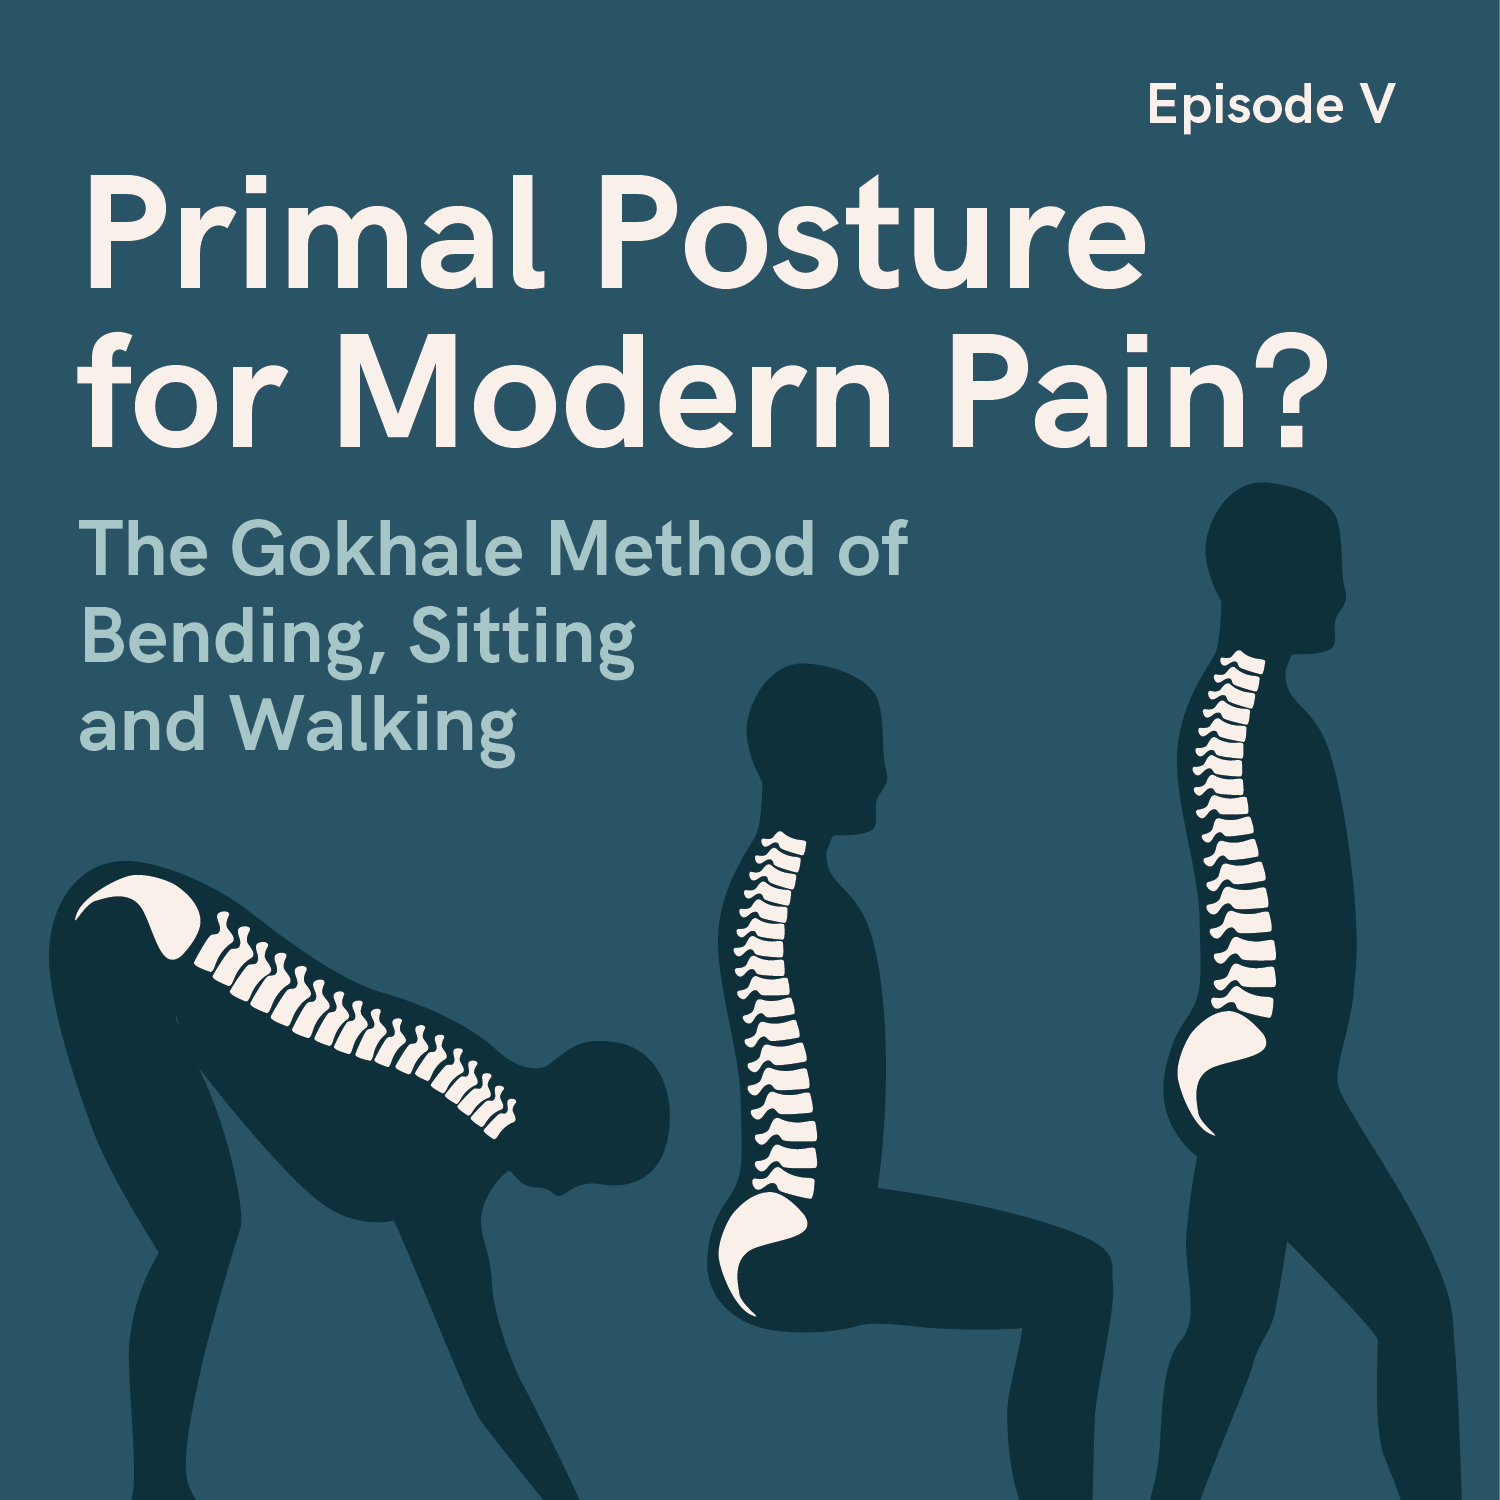 Primal posture includes bending, sitting, and standing with good spine alignment